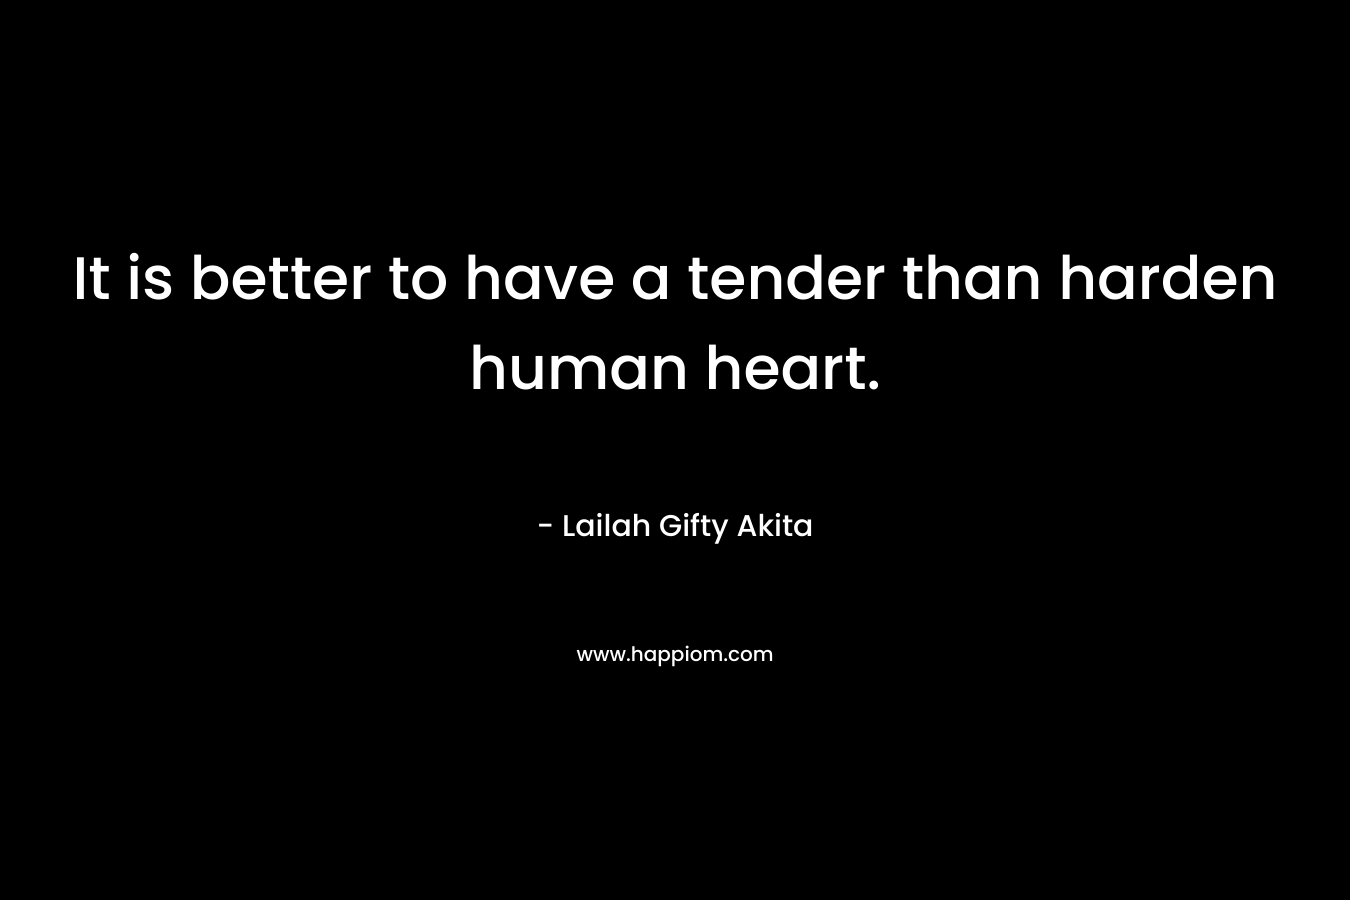 It is better to have a tender than harden human heart. – Lailah Gifty Akita